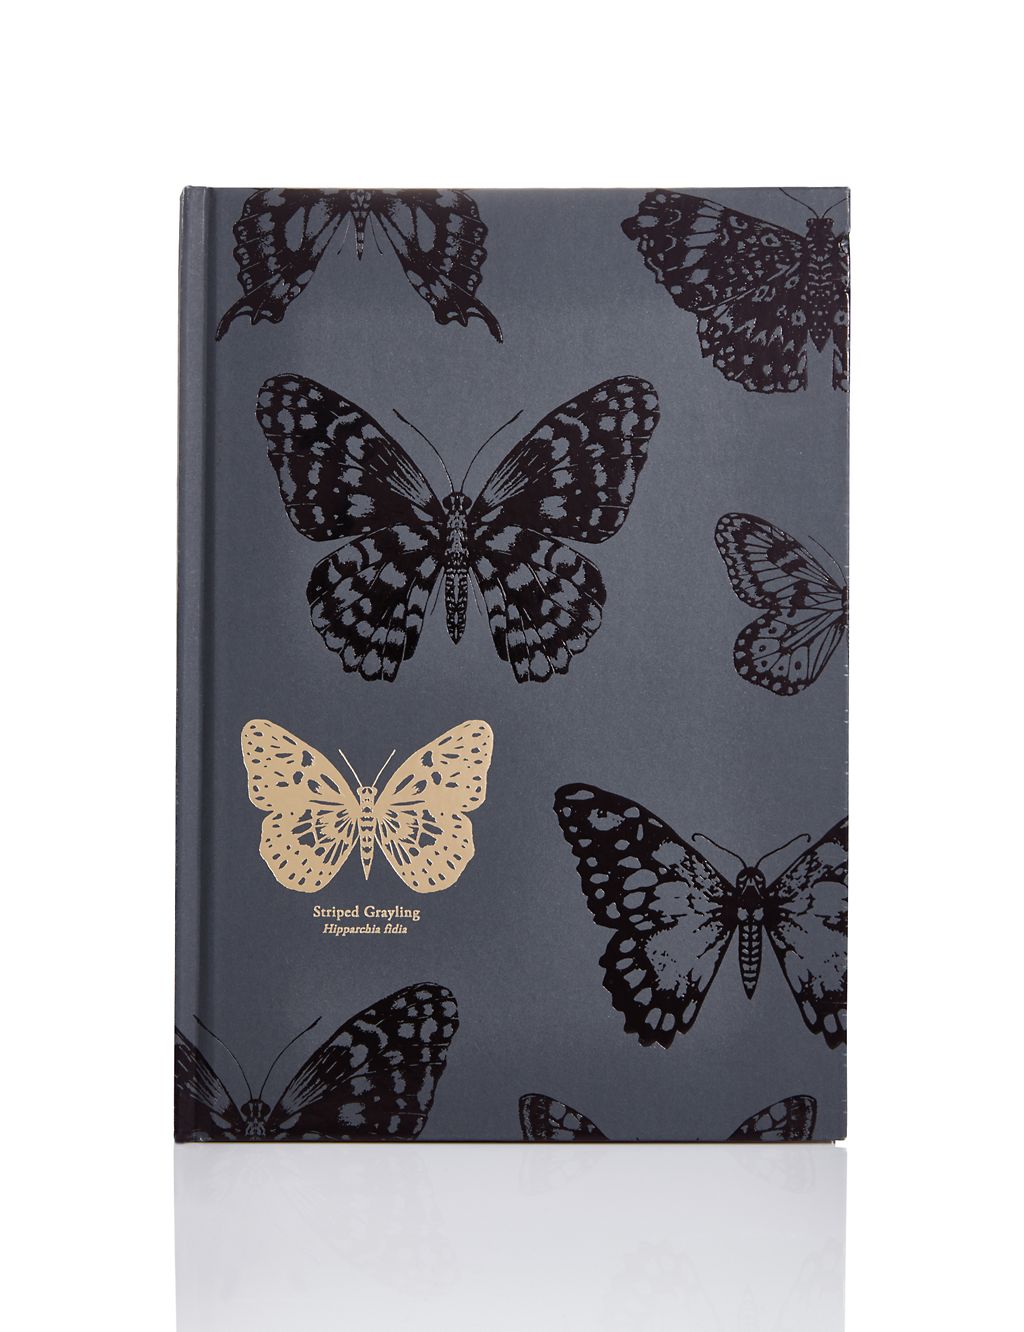 Curiosities ‘Striped Grayling’ Hard Back Notebook 3 of 3